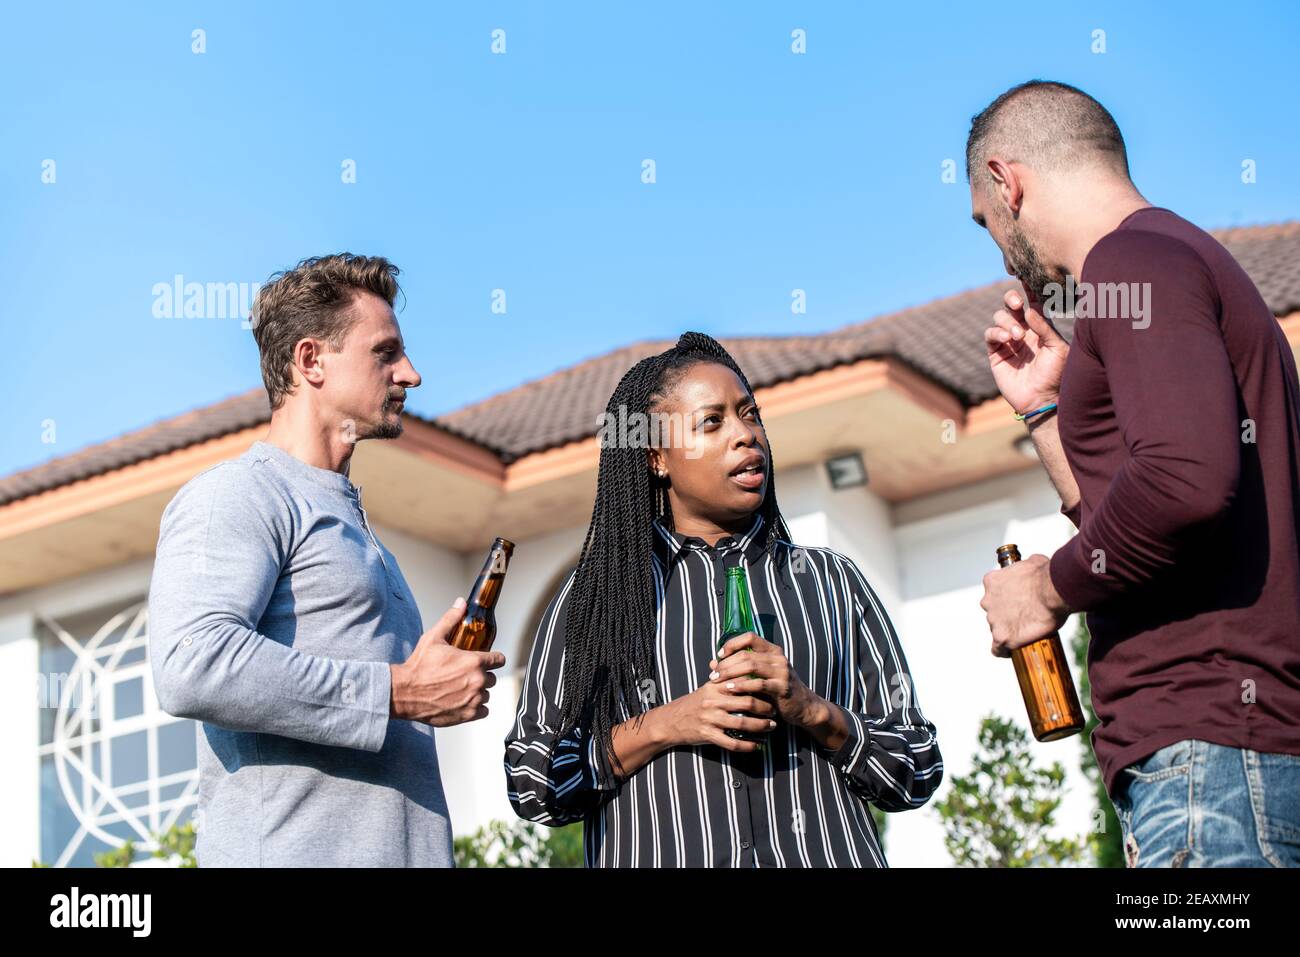 Group of diverse friends drinking alcohol and talking outdoors in backyard Stock Photo